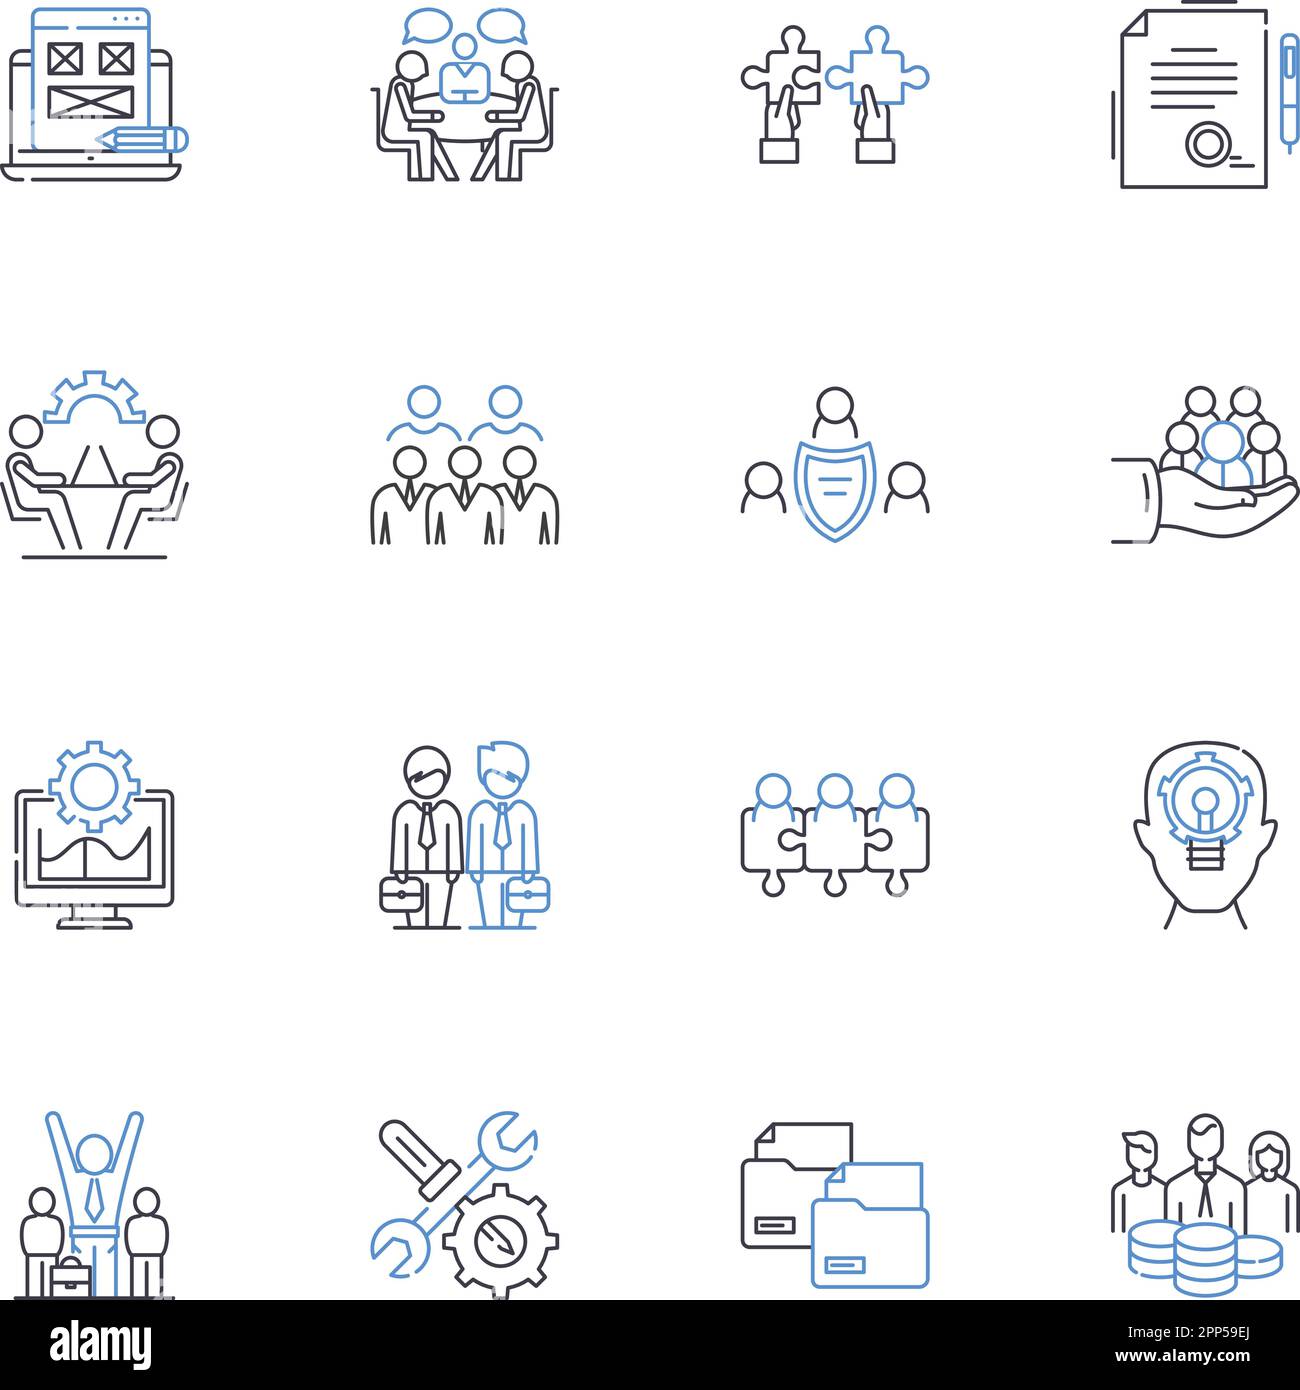 Market research line icons collection. Demographics, Surveys, Analysis, Statistics, Focus groups, Trends, Sampling vector and linear illustration Stock Vector